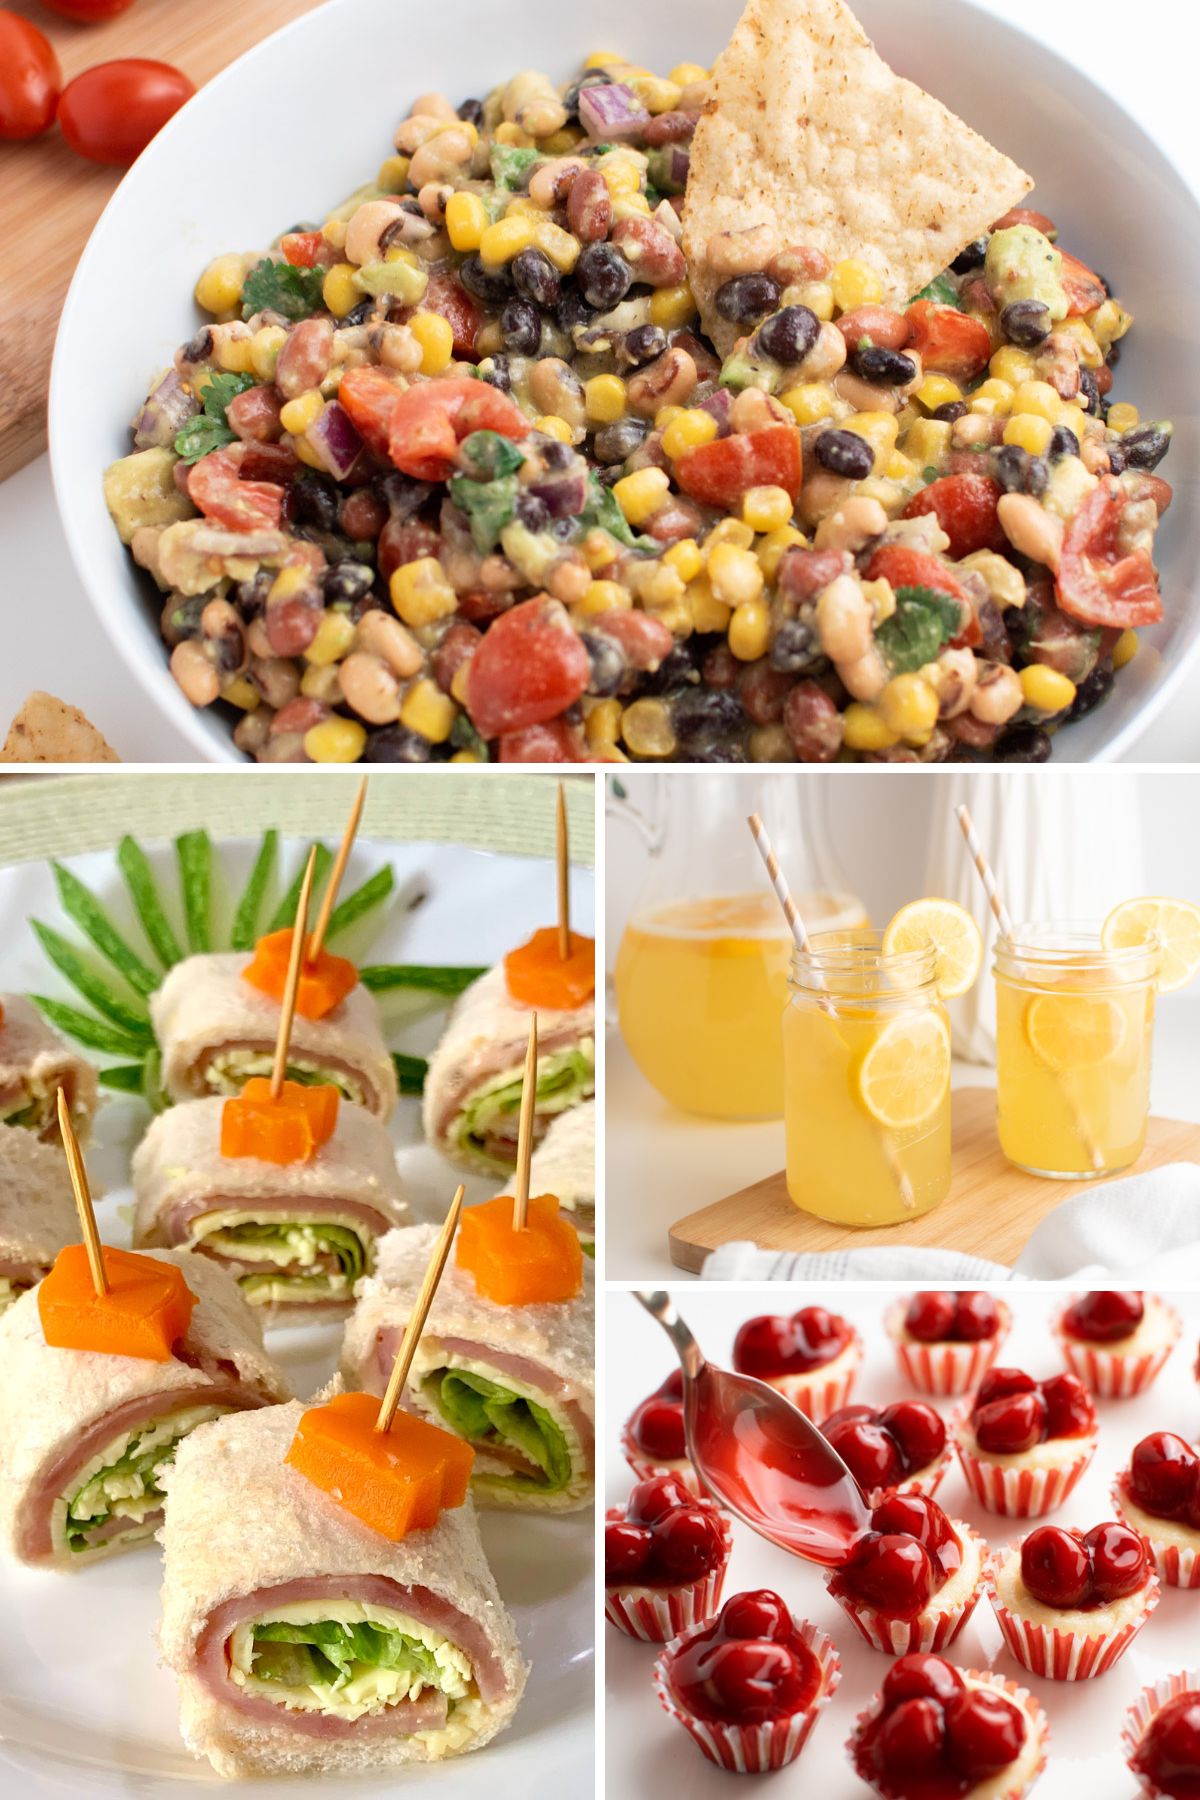 Collage of party foods including dip, tortilla pinwheels, mini cheesecakes, and lemonade.